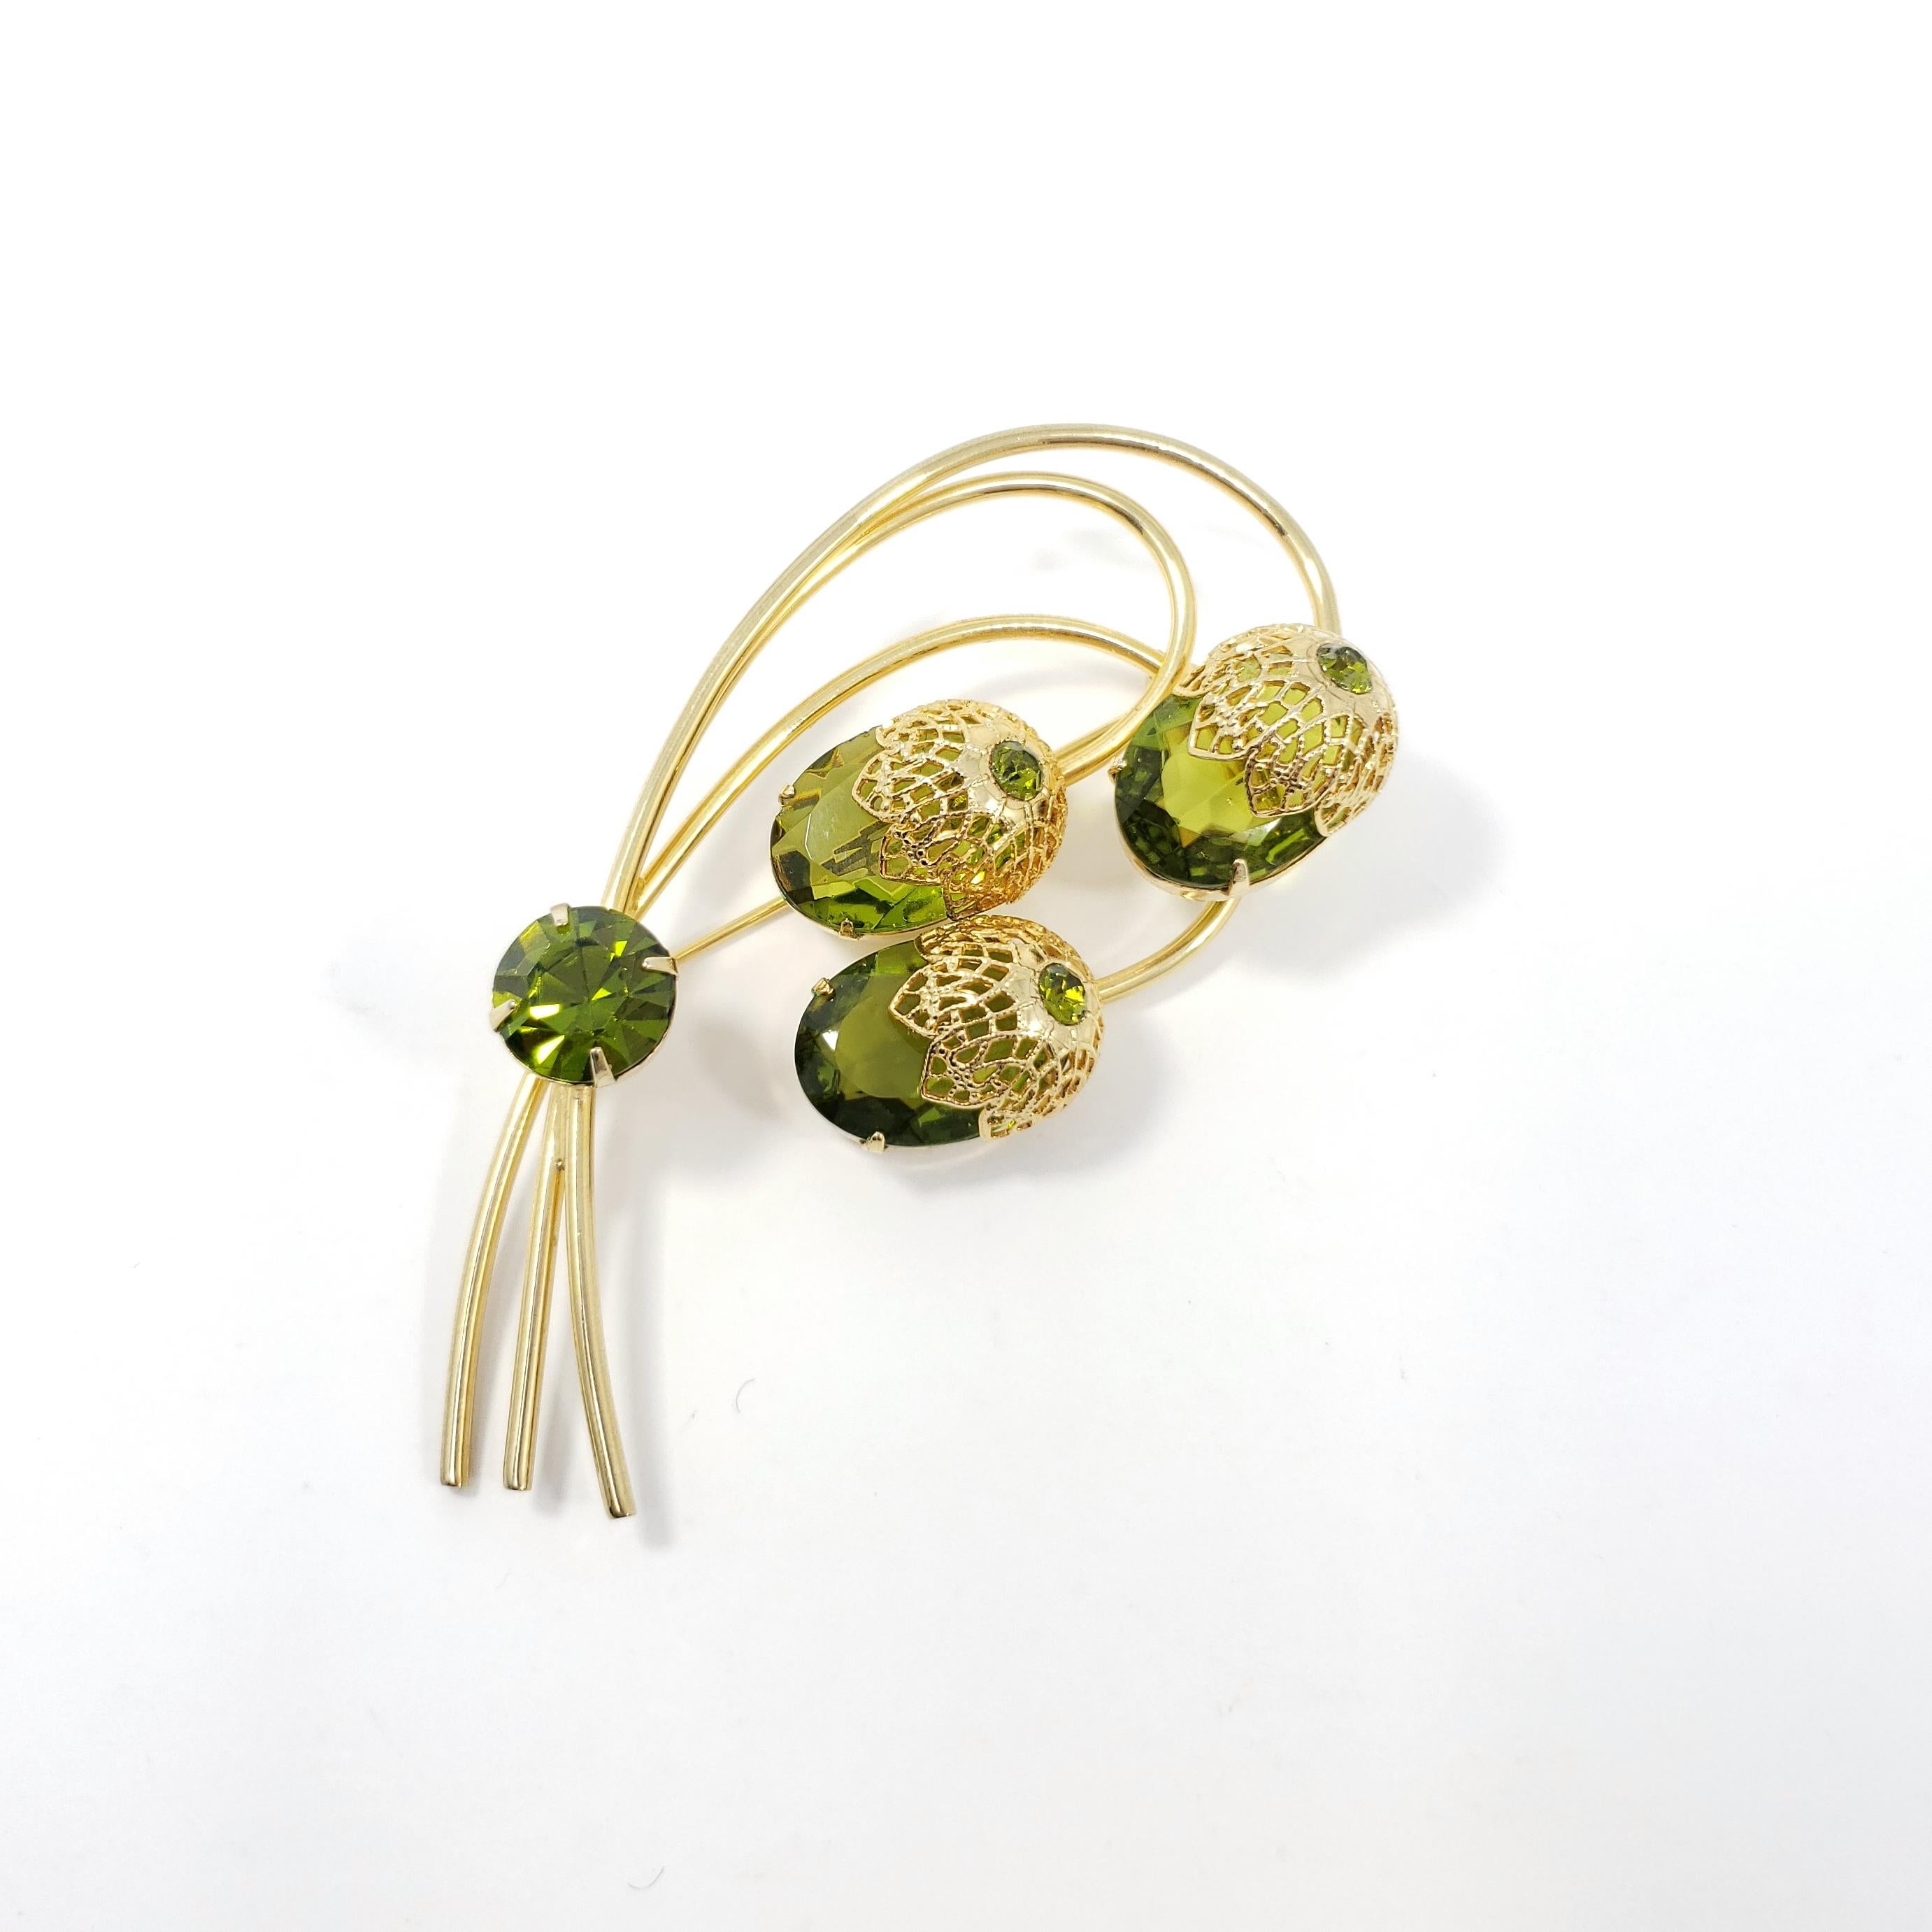 Golden Sarah Coventry pin brooch, featuring olivine crystal acorns on a stylized branch.

Gold-plated.

Marks / hallmarks: Sarah Cov